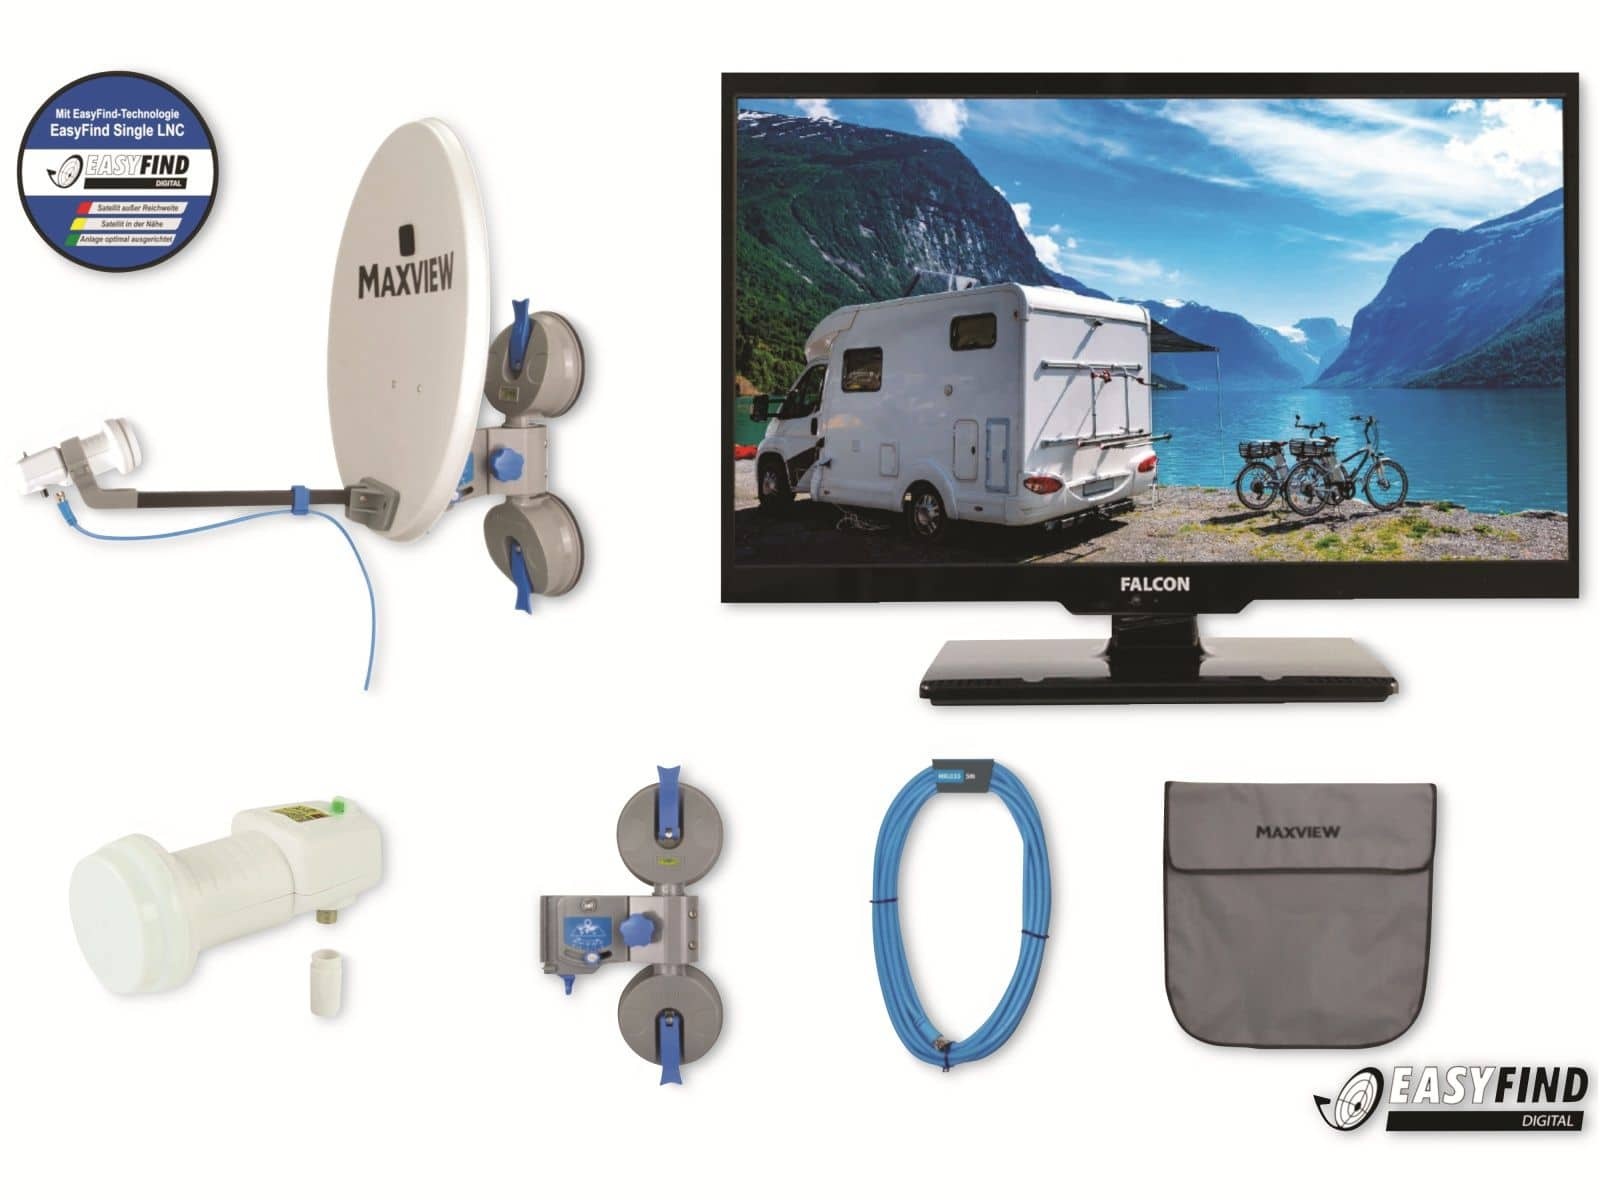 FALCON Easyfind TV Camping Set Maxview Pro, inkl. LED-TV 61 cm (24")